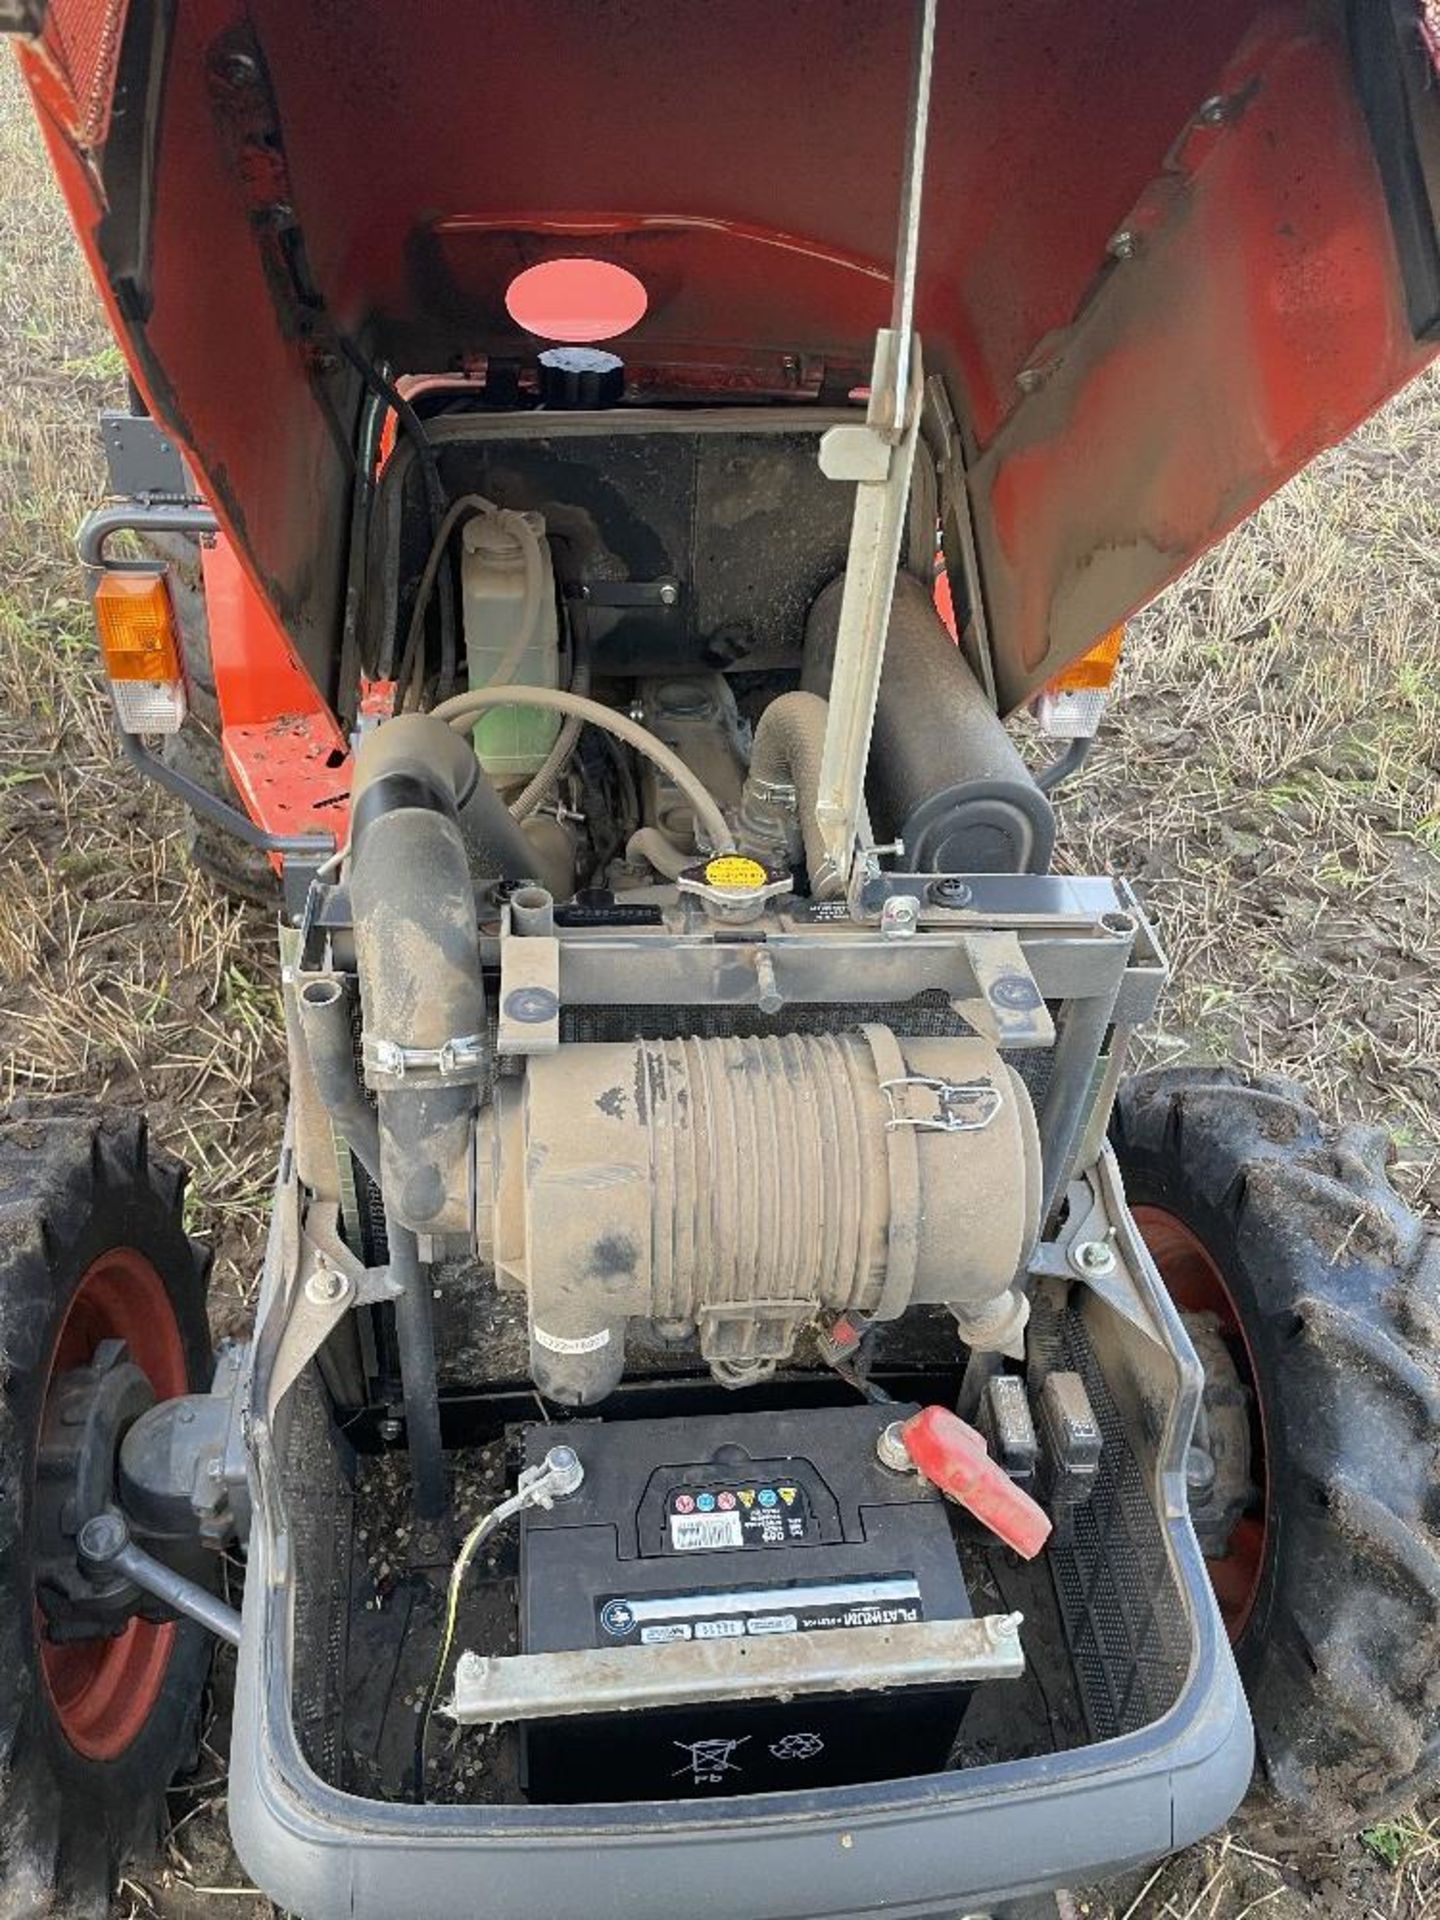 Kubota L3200 4Wd Compact Tractor - AU13 CYC - 2013 - 3 point linkage, PTO, approx. 380 hours. - Image 8 of 9